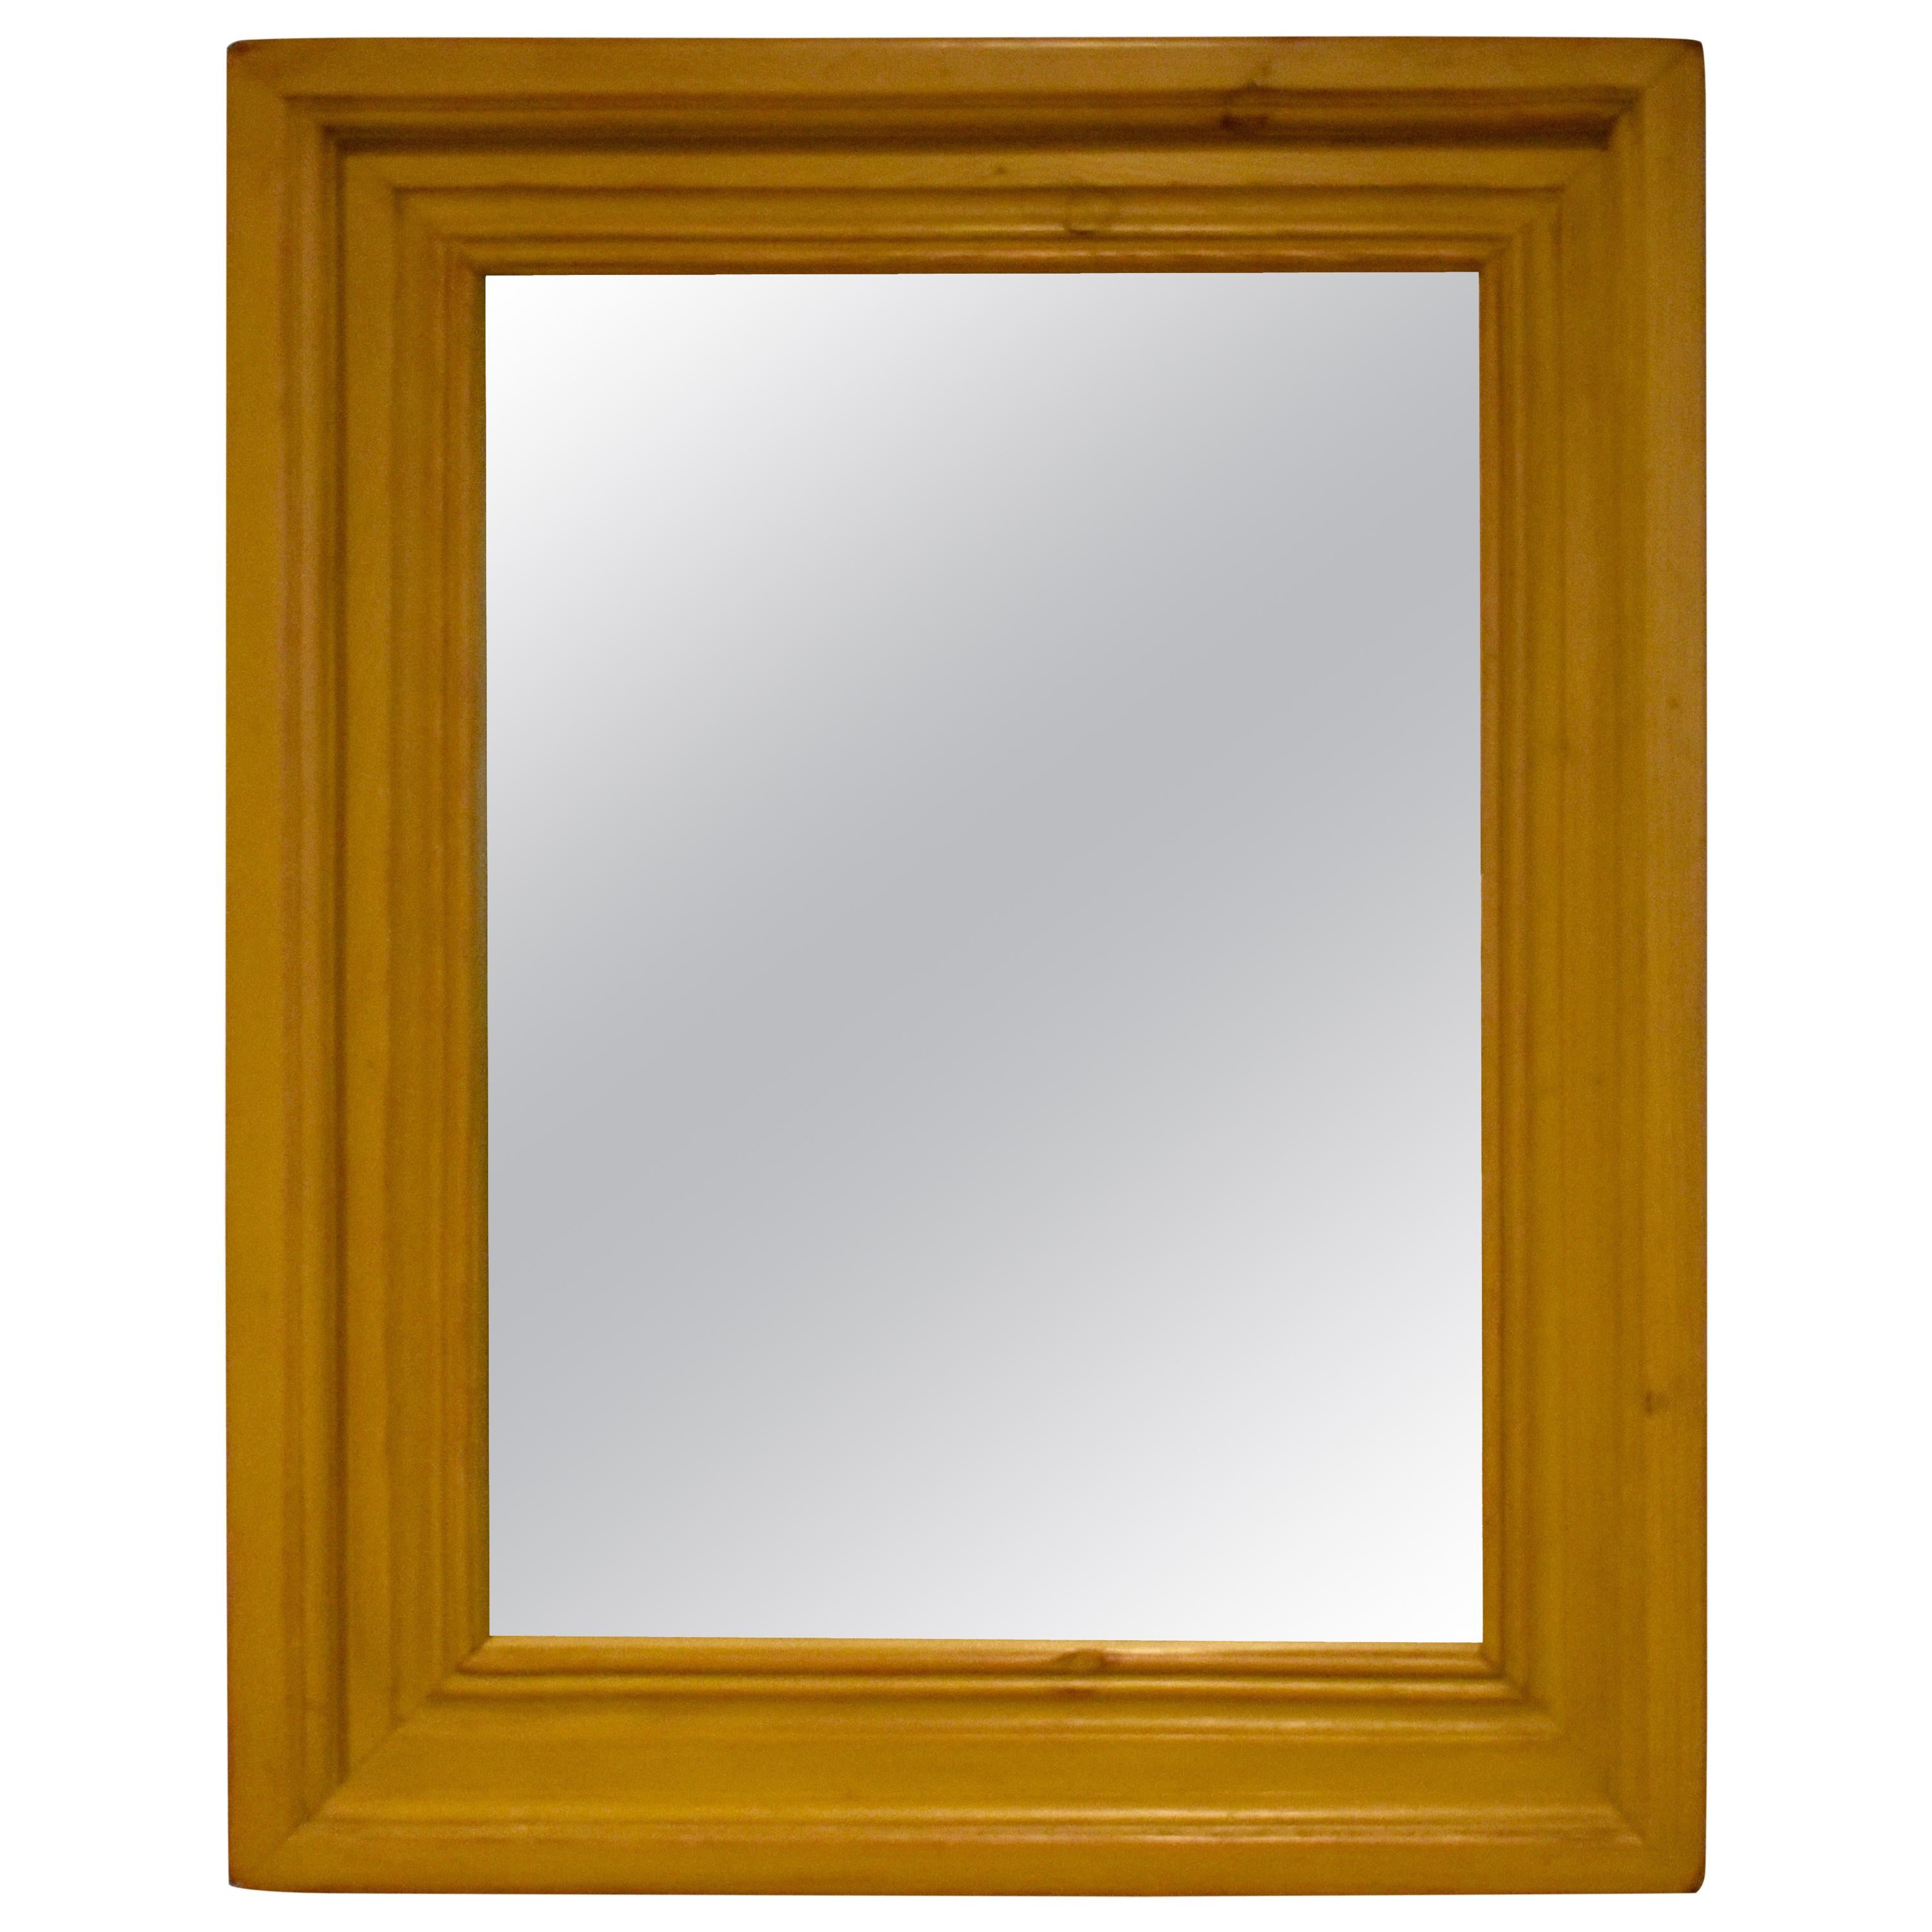 Painted Pine-Framed Wall Mirror